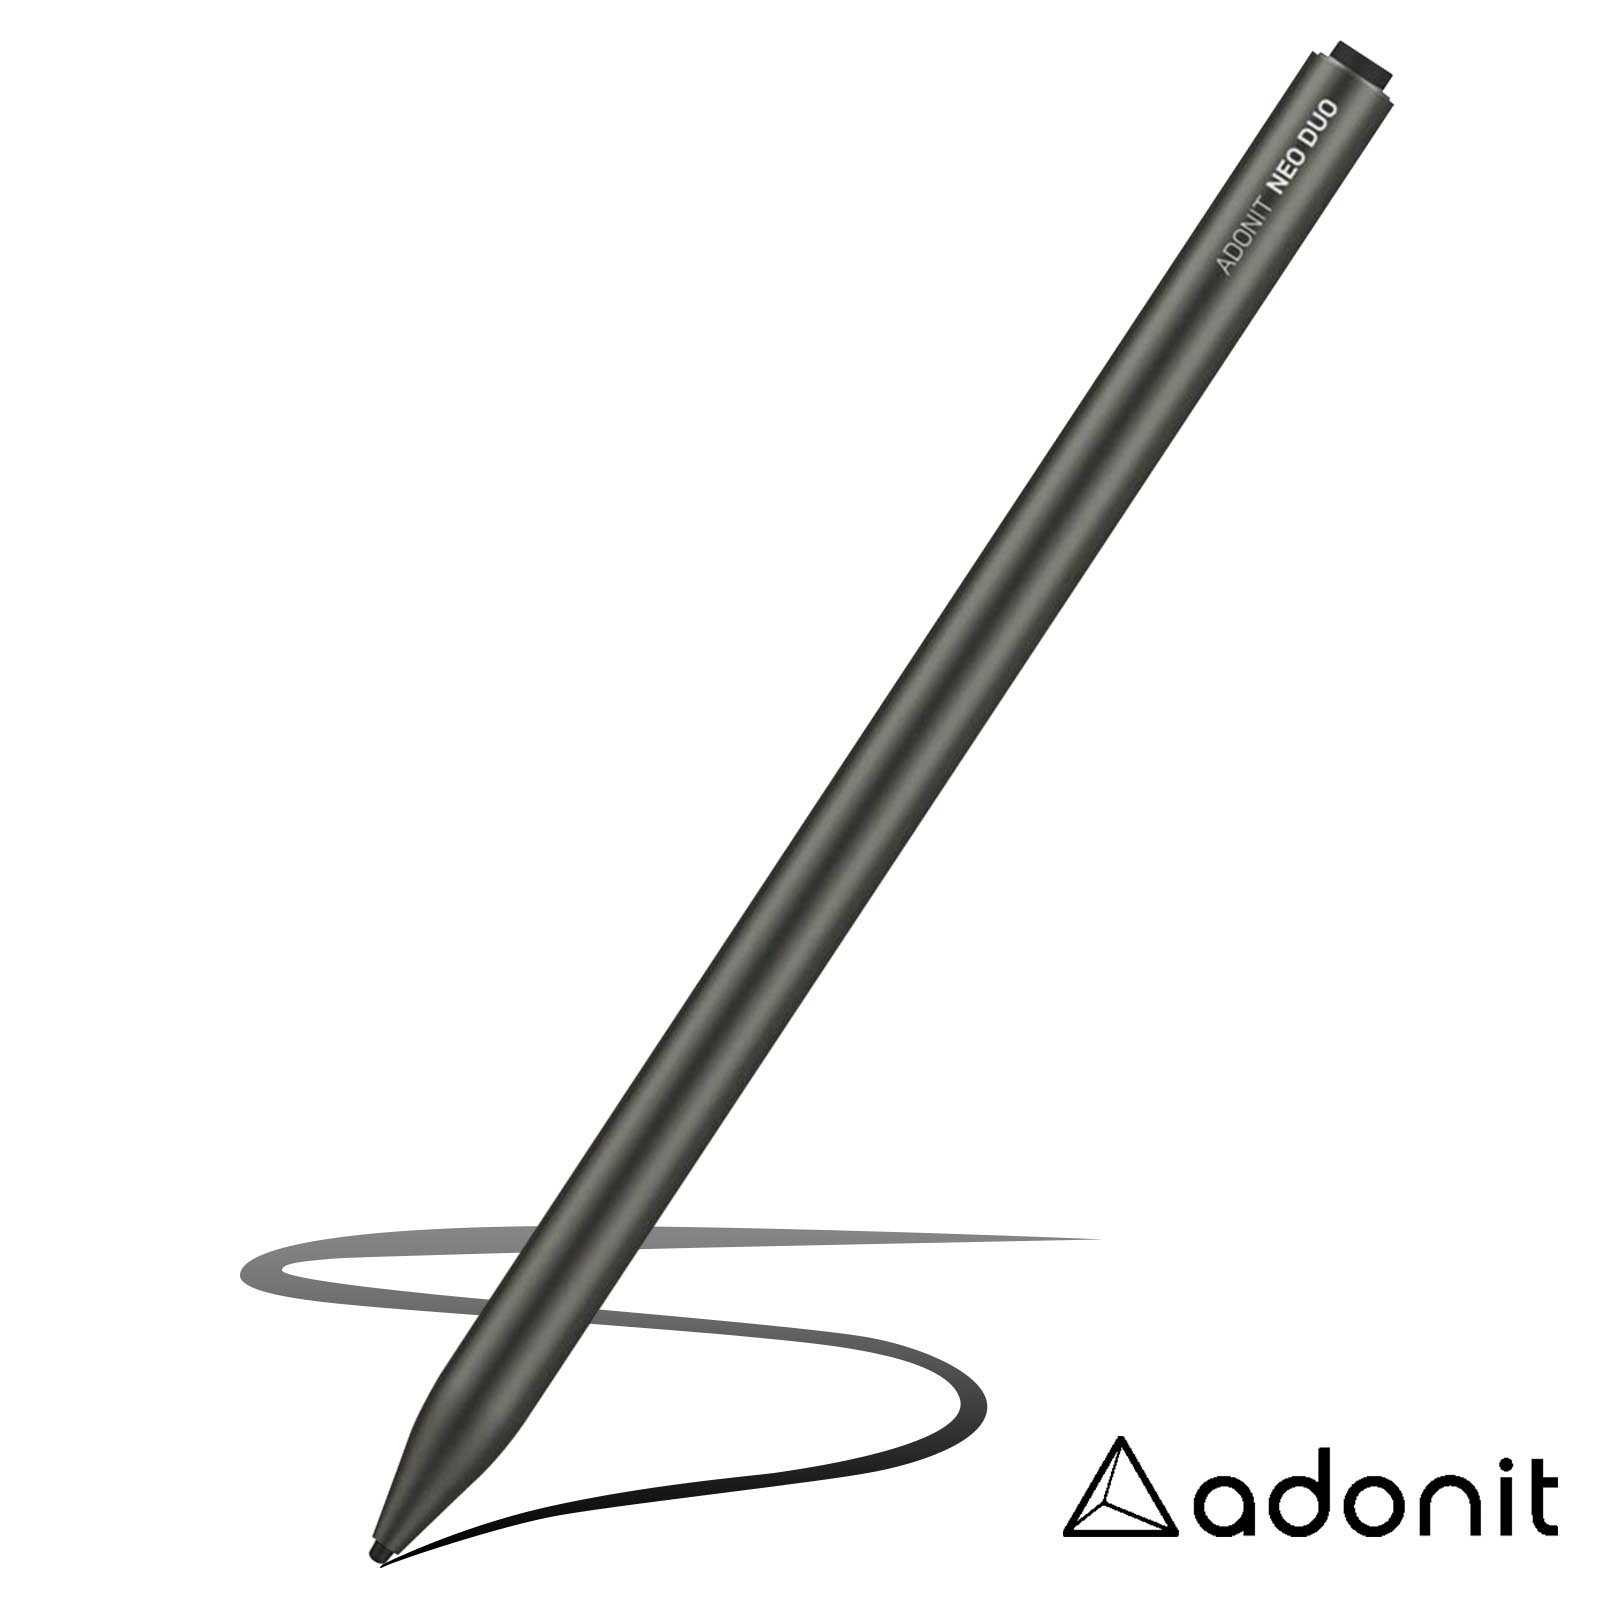 STYLET NEO DUO GRAPHITE BLACK Stylet Dual-mode pour iPhone et iPad